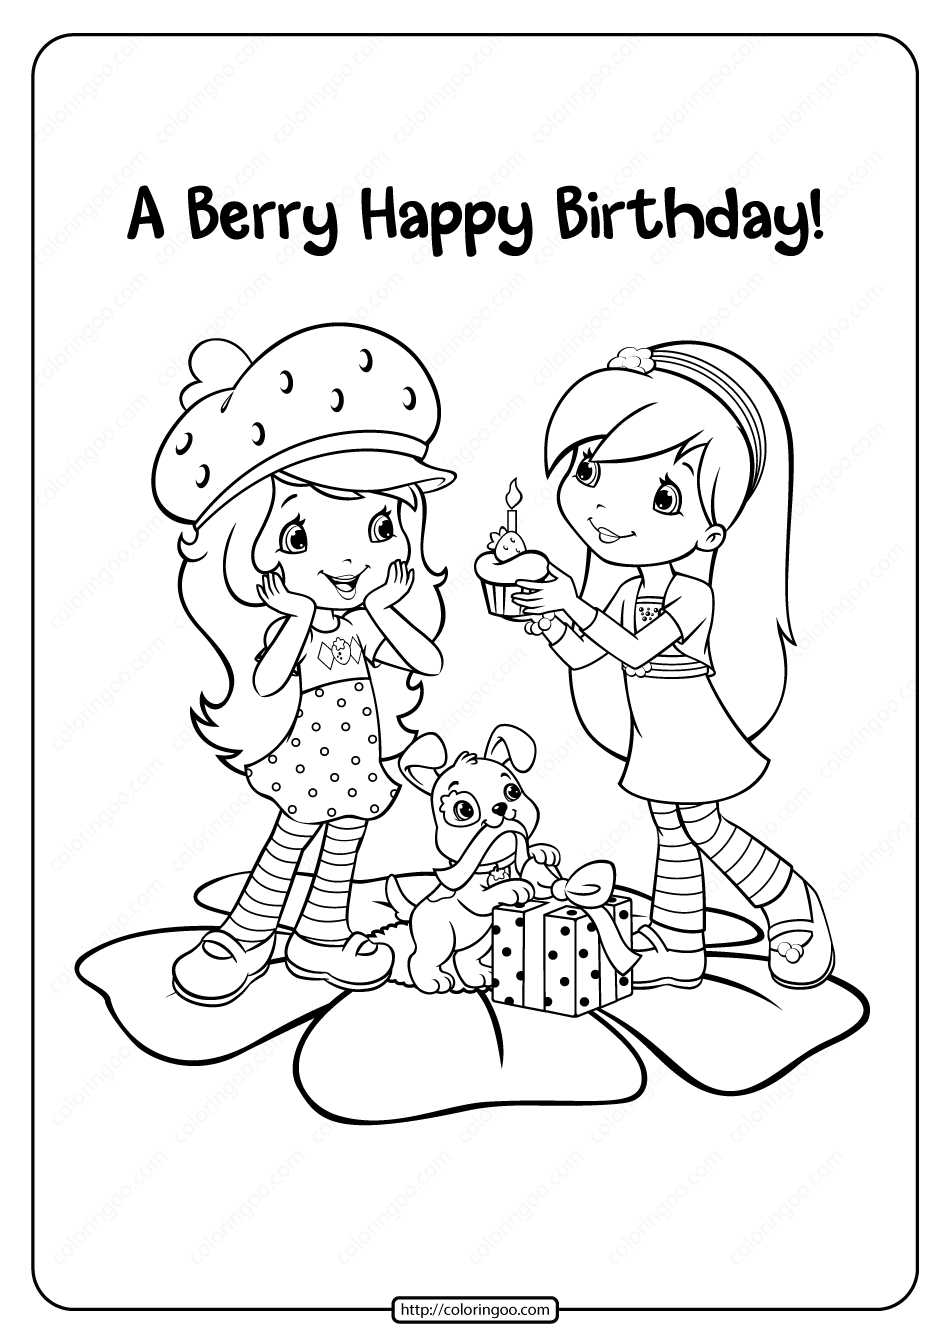 printable a berry happy birthday coloring page